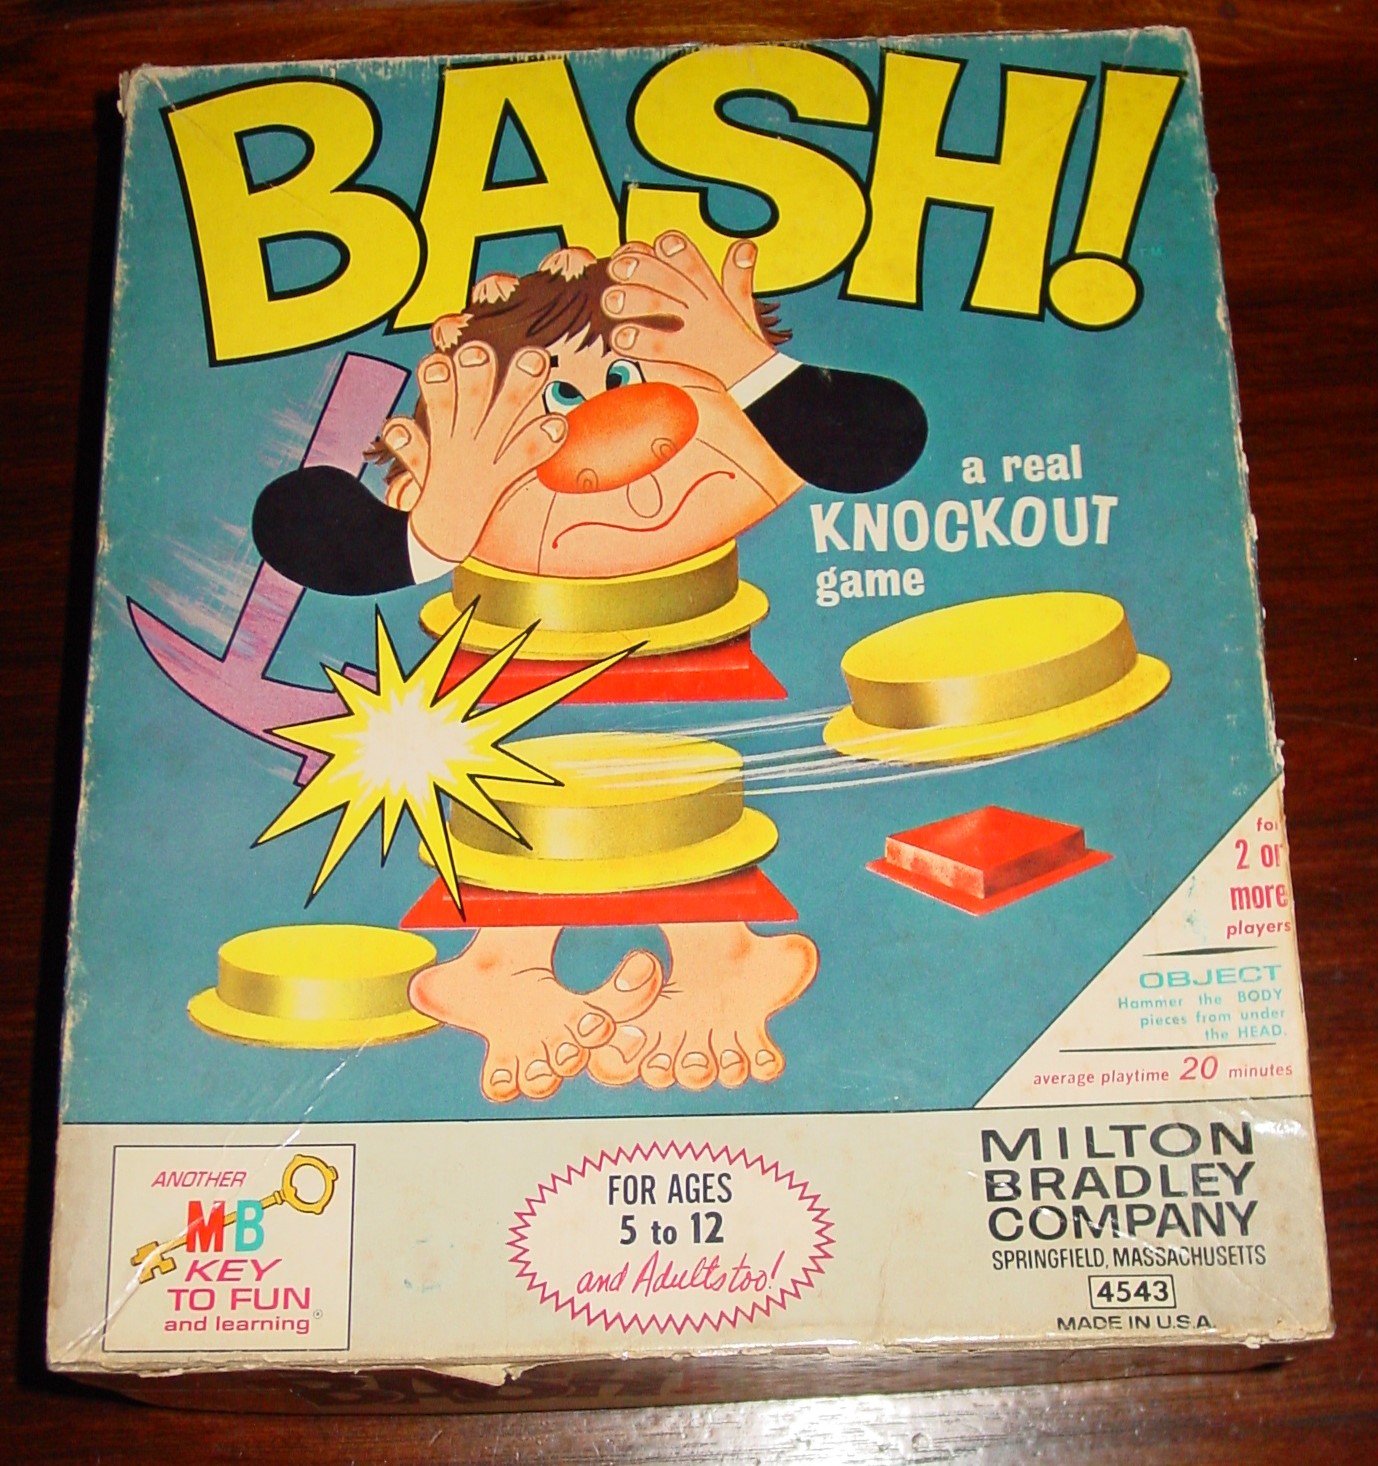 vintage toys - bash game - Bash! a real Knockout game Mote Object 20 Ac Www For Ages 5 to 12 and Adultitool www Milton Bradley Company Springfield, Massachusetts 4543 Made In Usa Skey To Fun